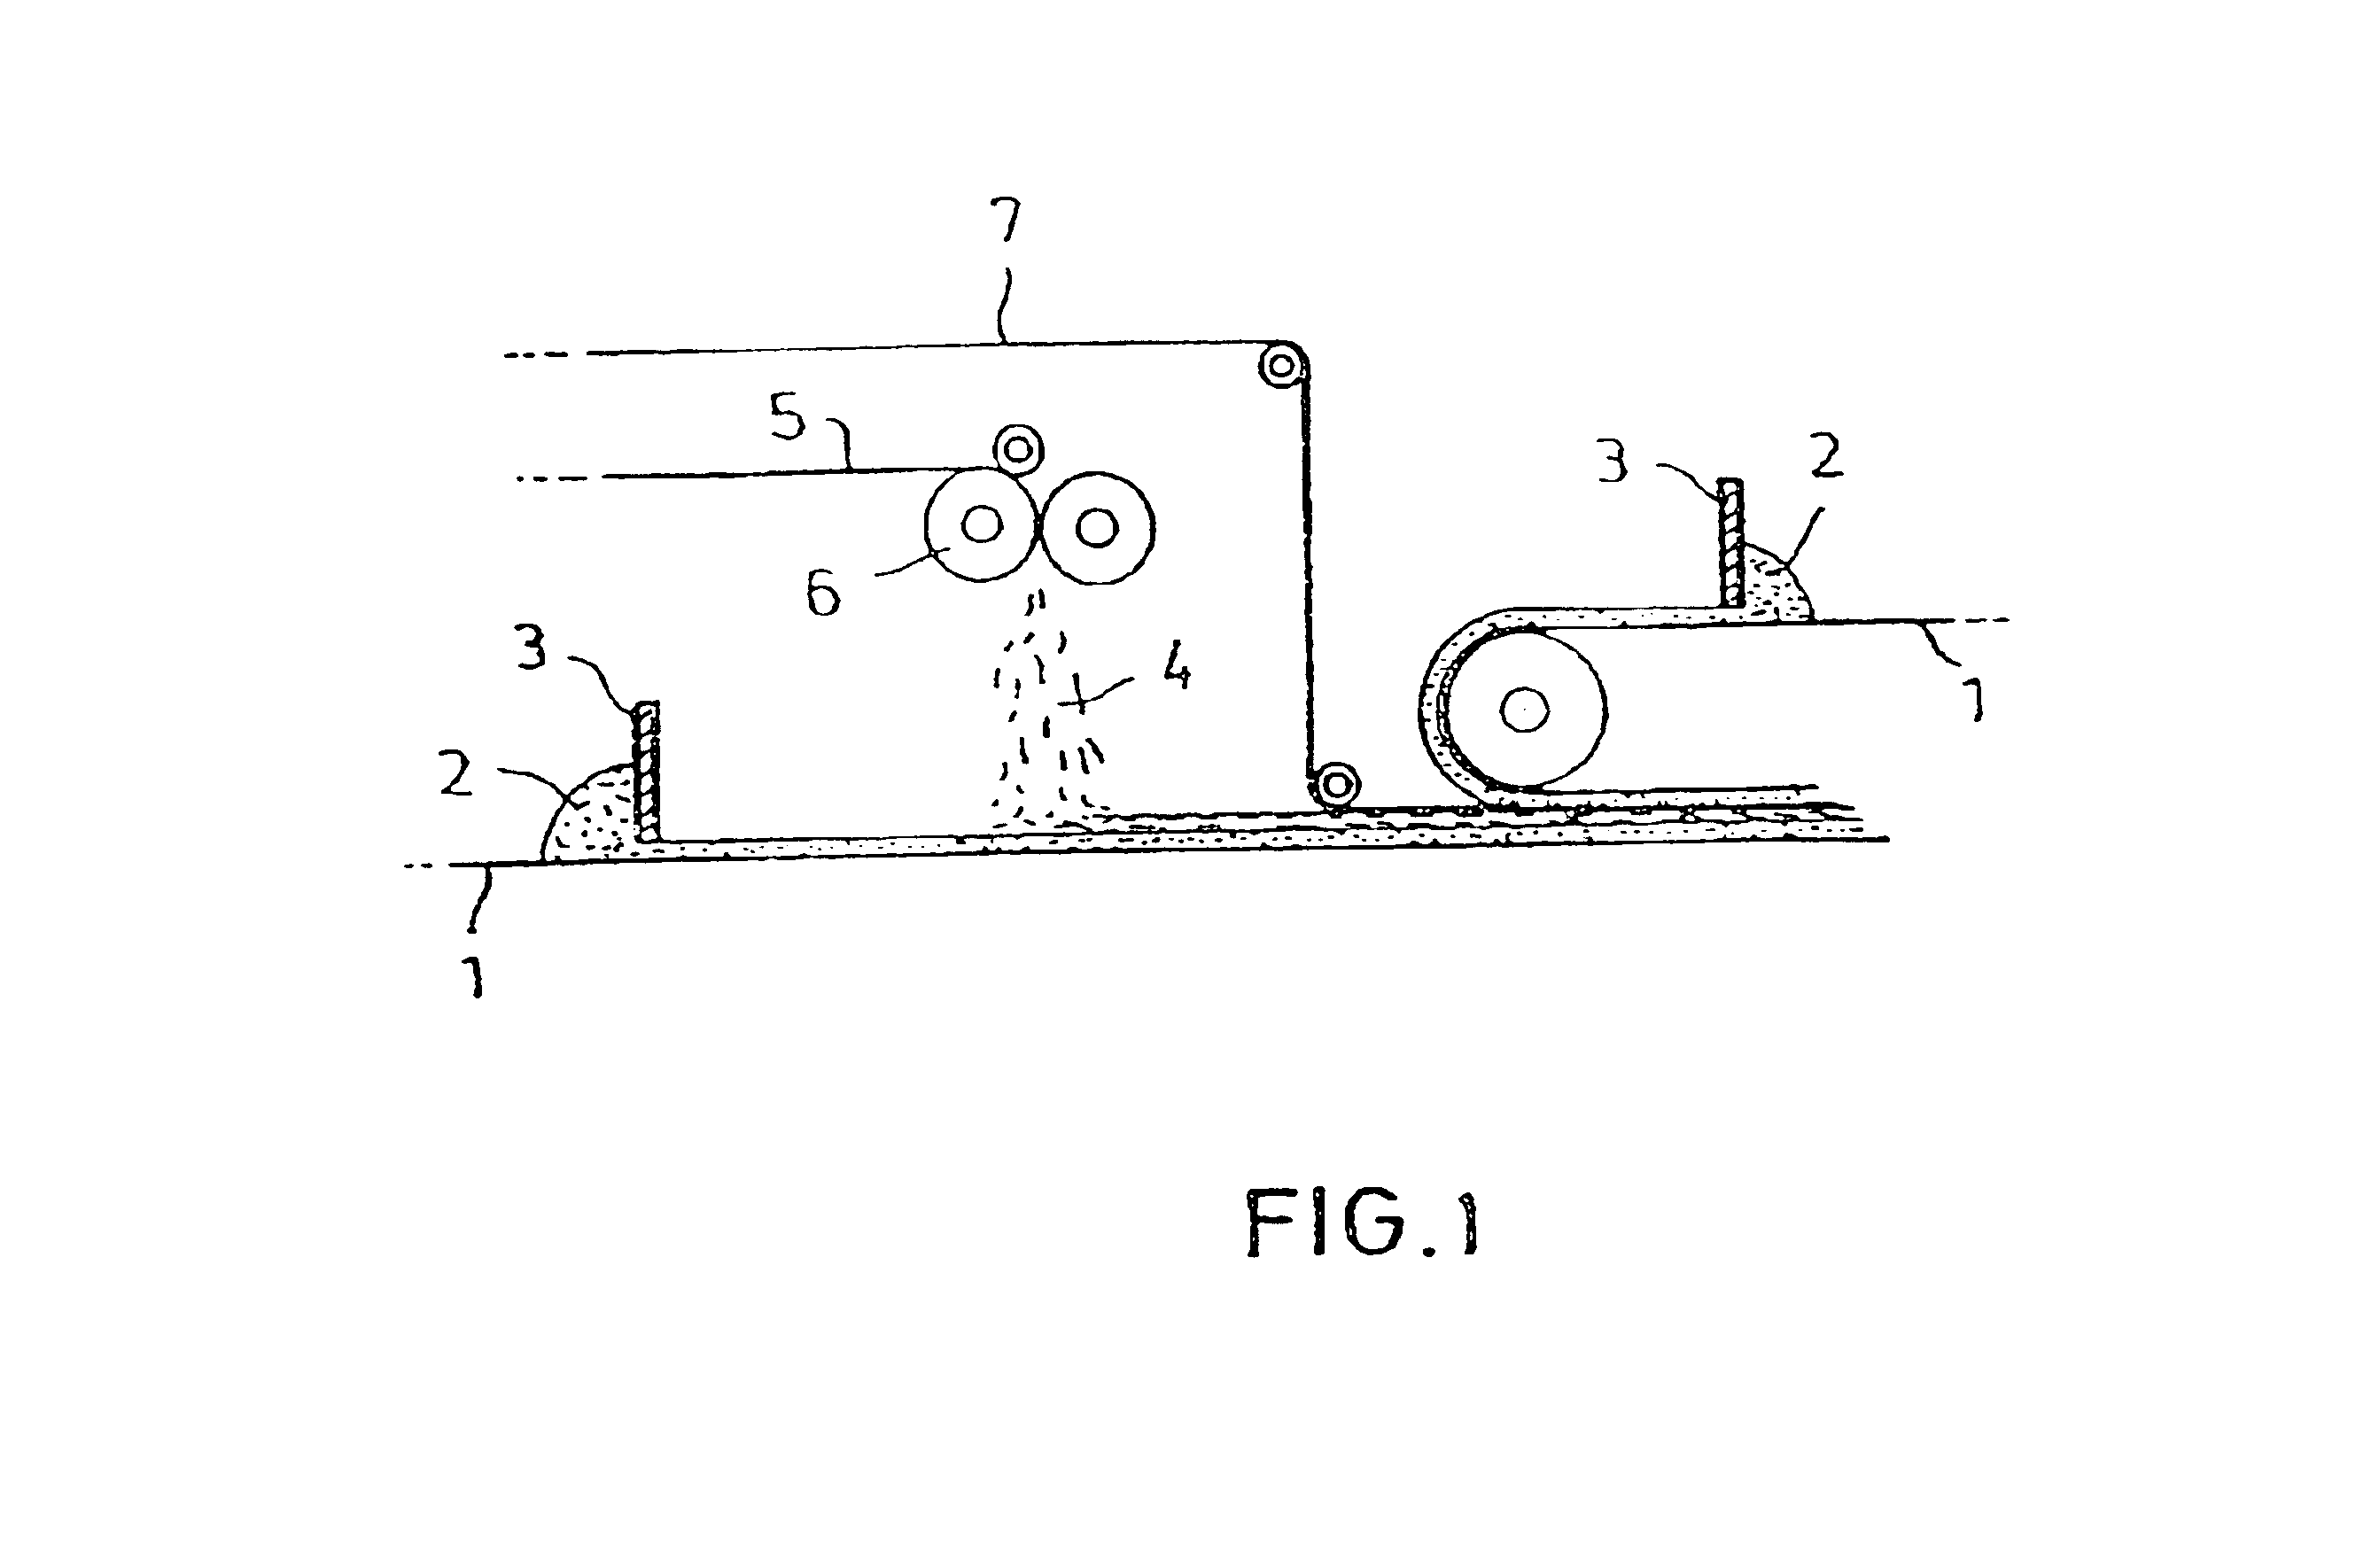 Carbon-fibre-reinforced SMC for multi-axially reinforced components